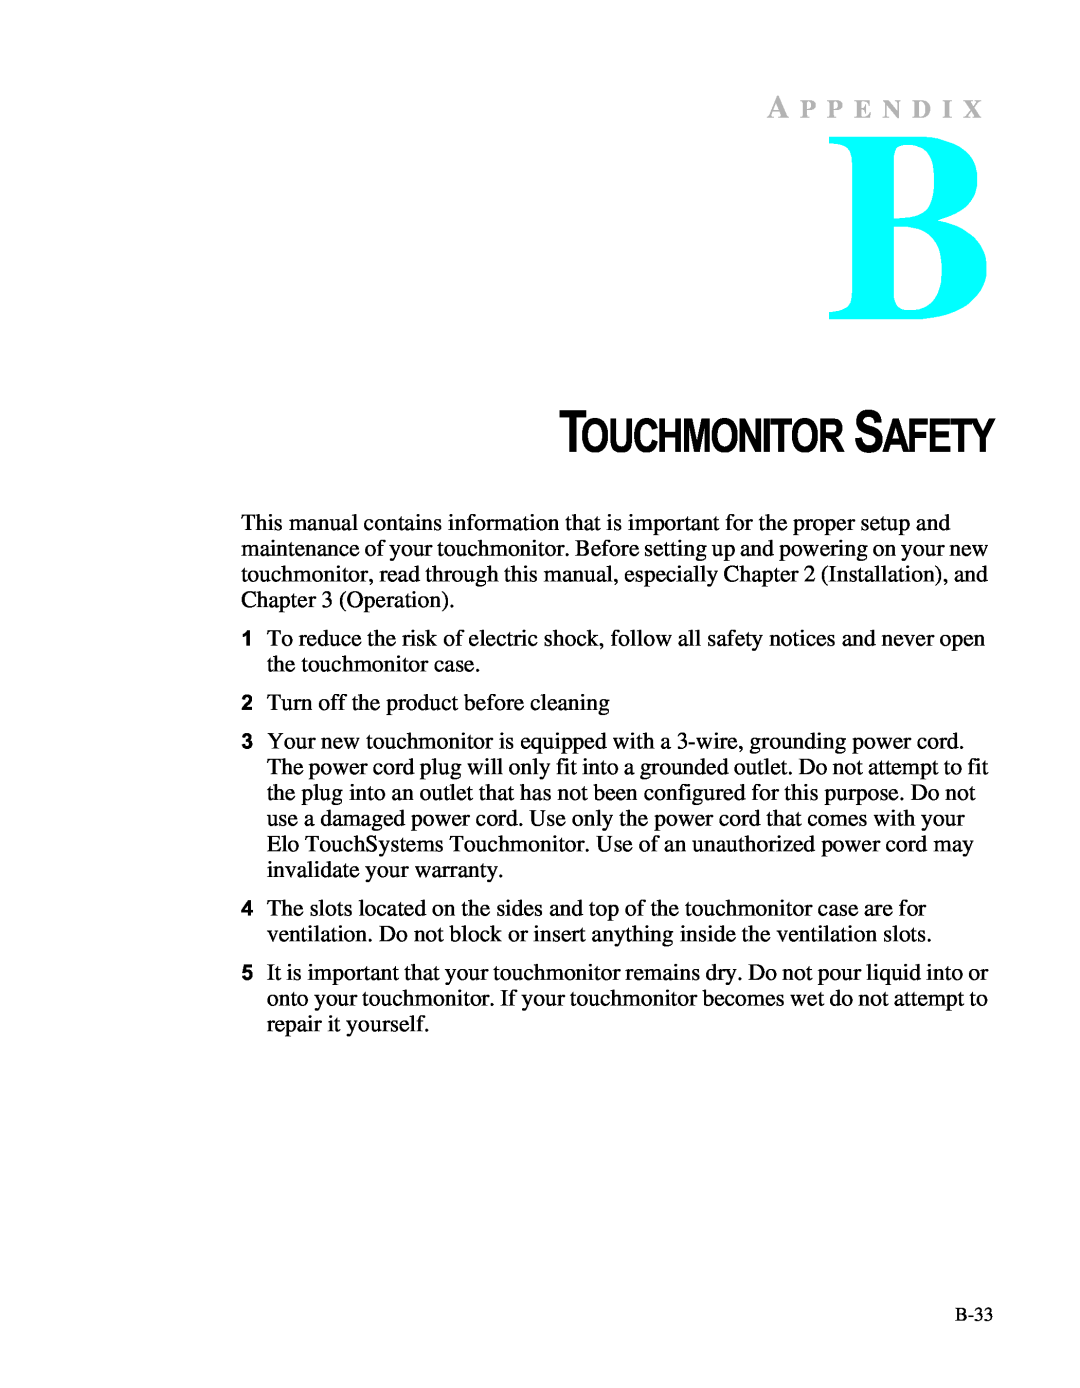 Elo TouchSystems LCD manual Touchmonitor Safety, A P P E N D I 